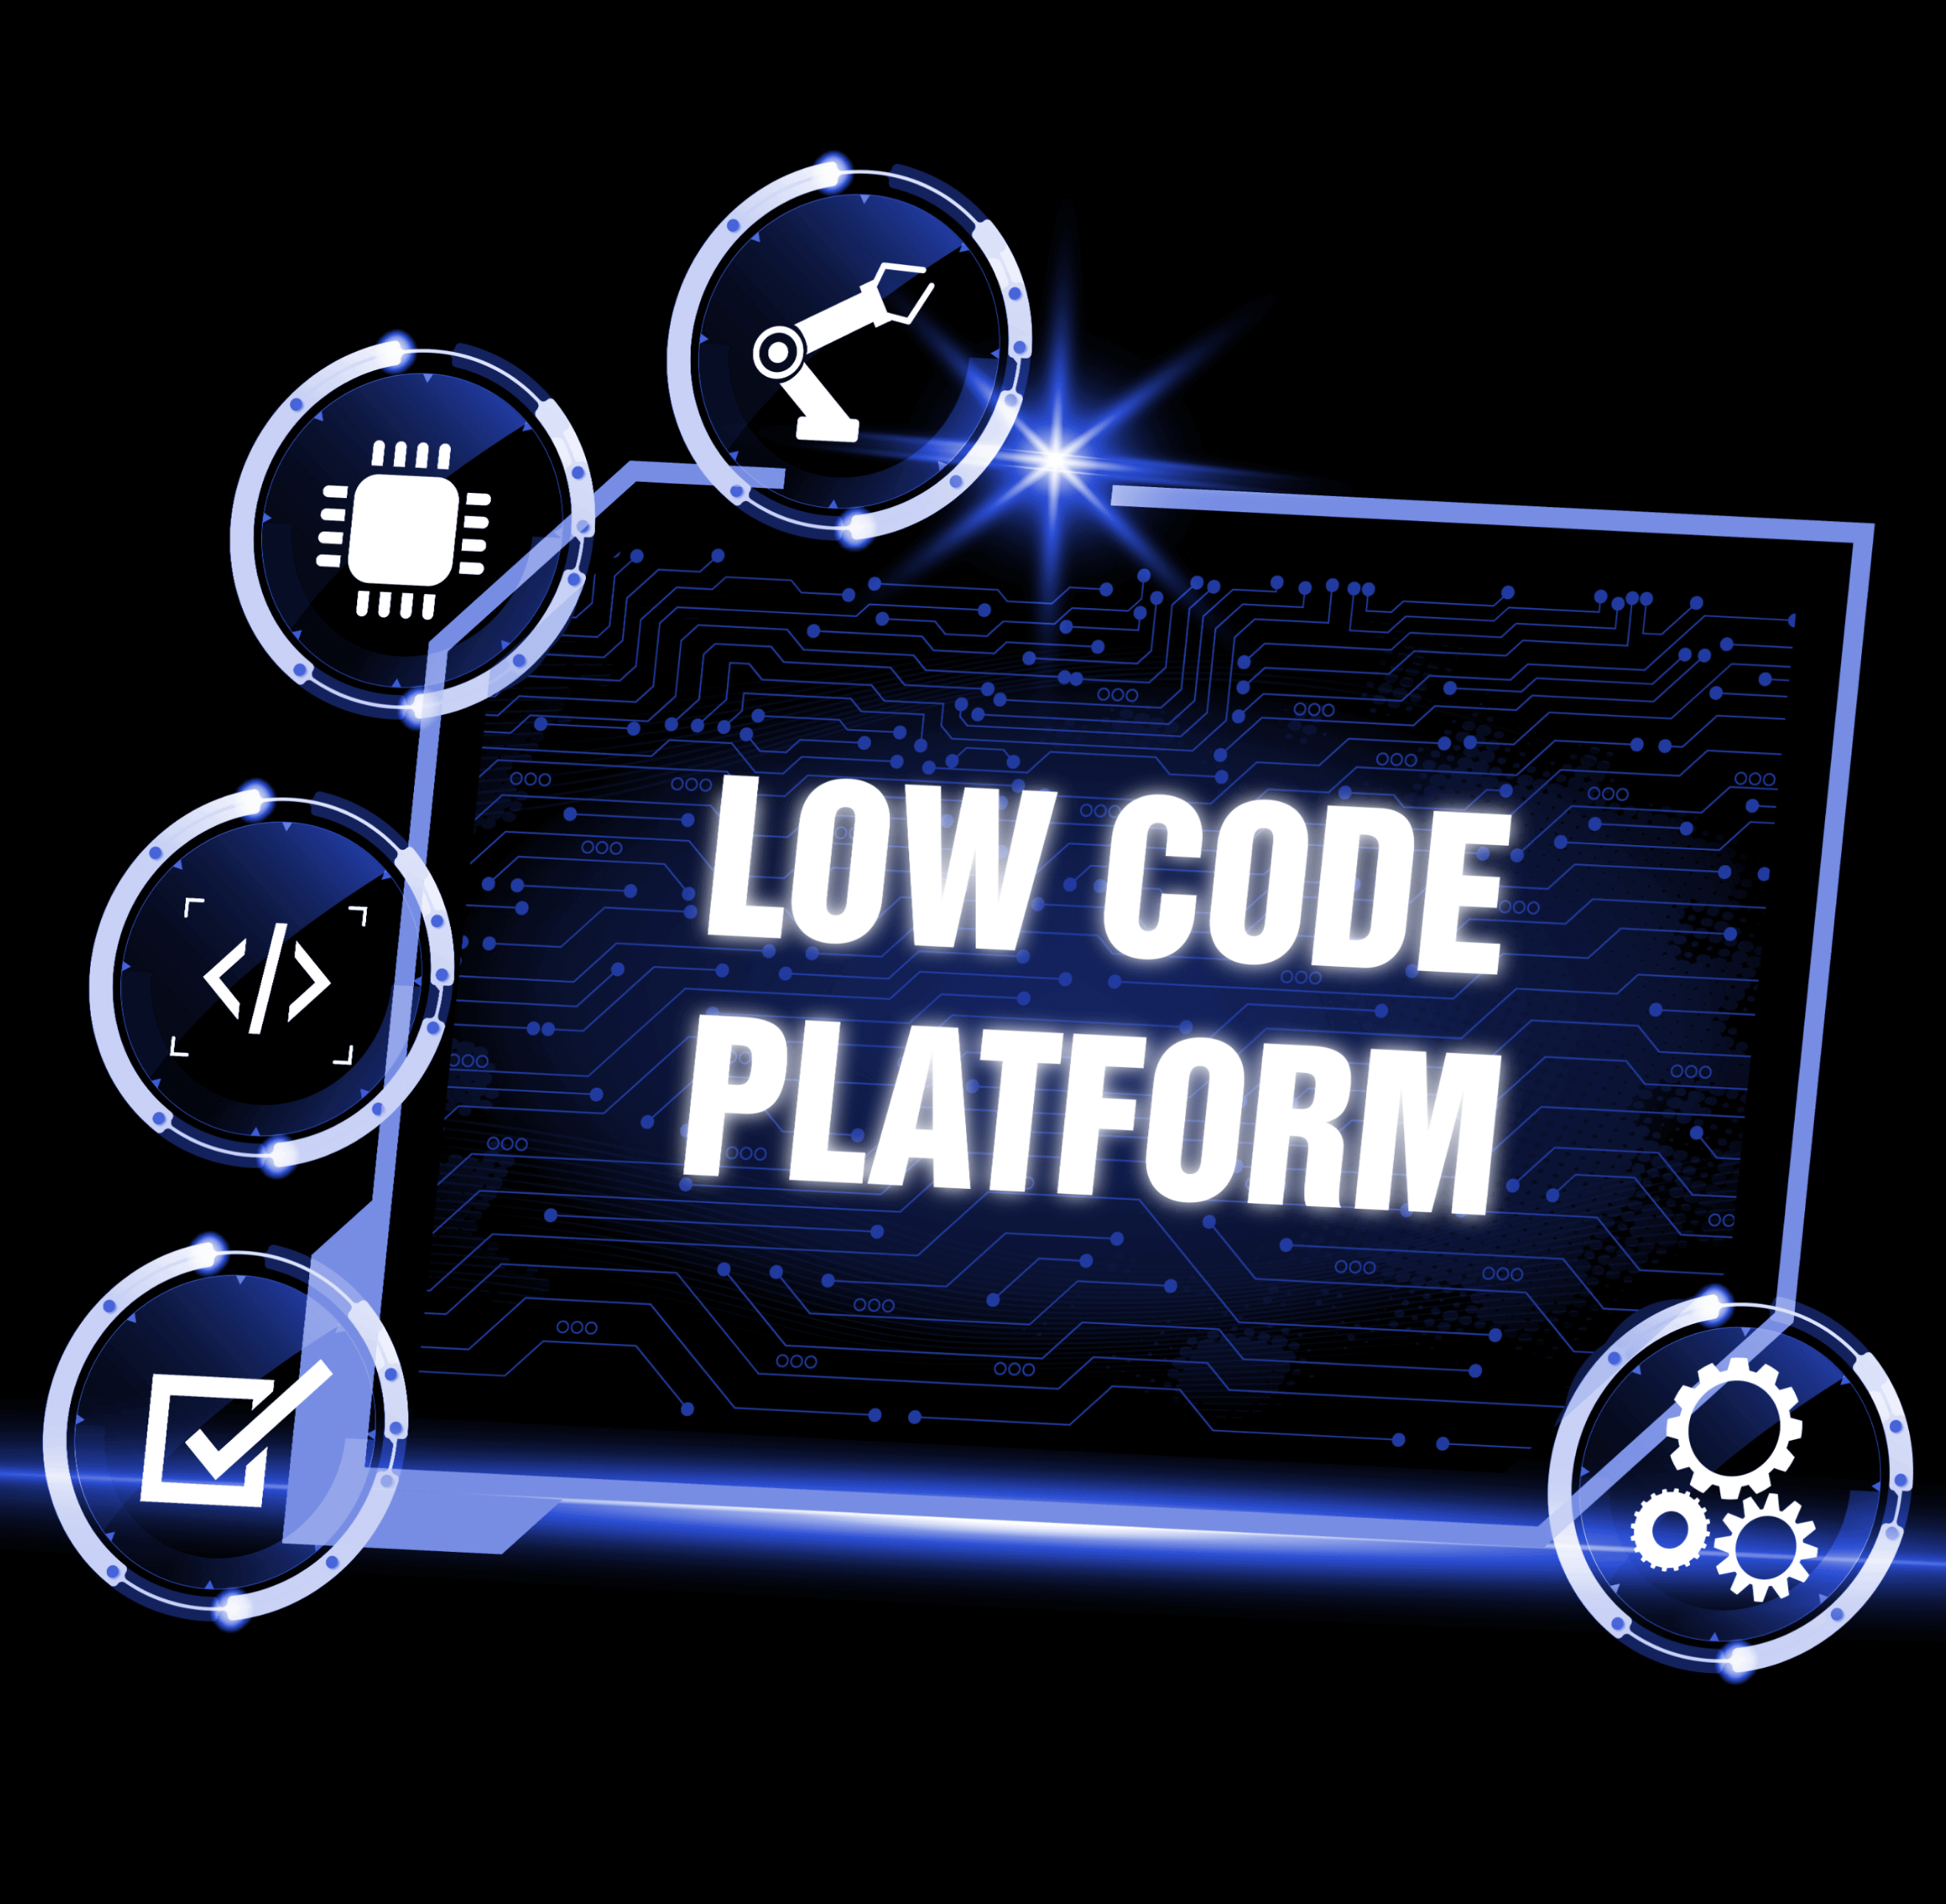 Kick-start Your Digital Journey With Our Creative No Code and Low Code Services